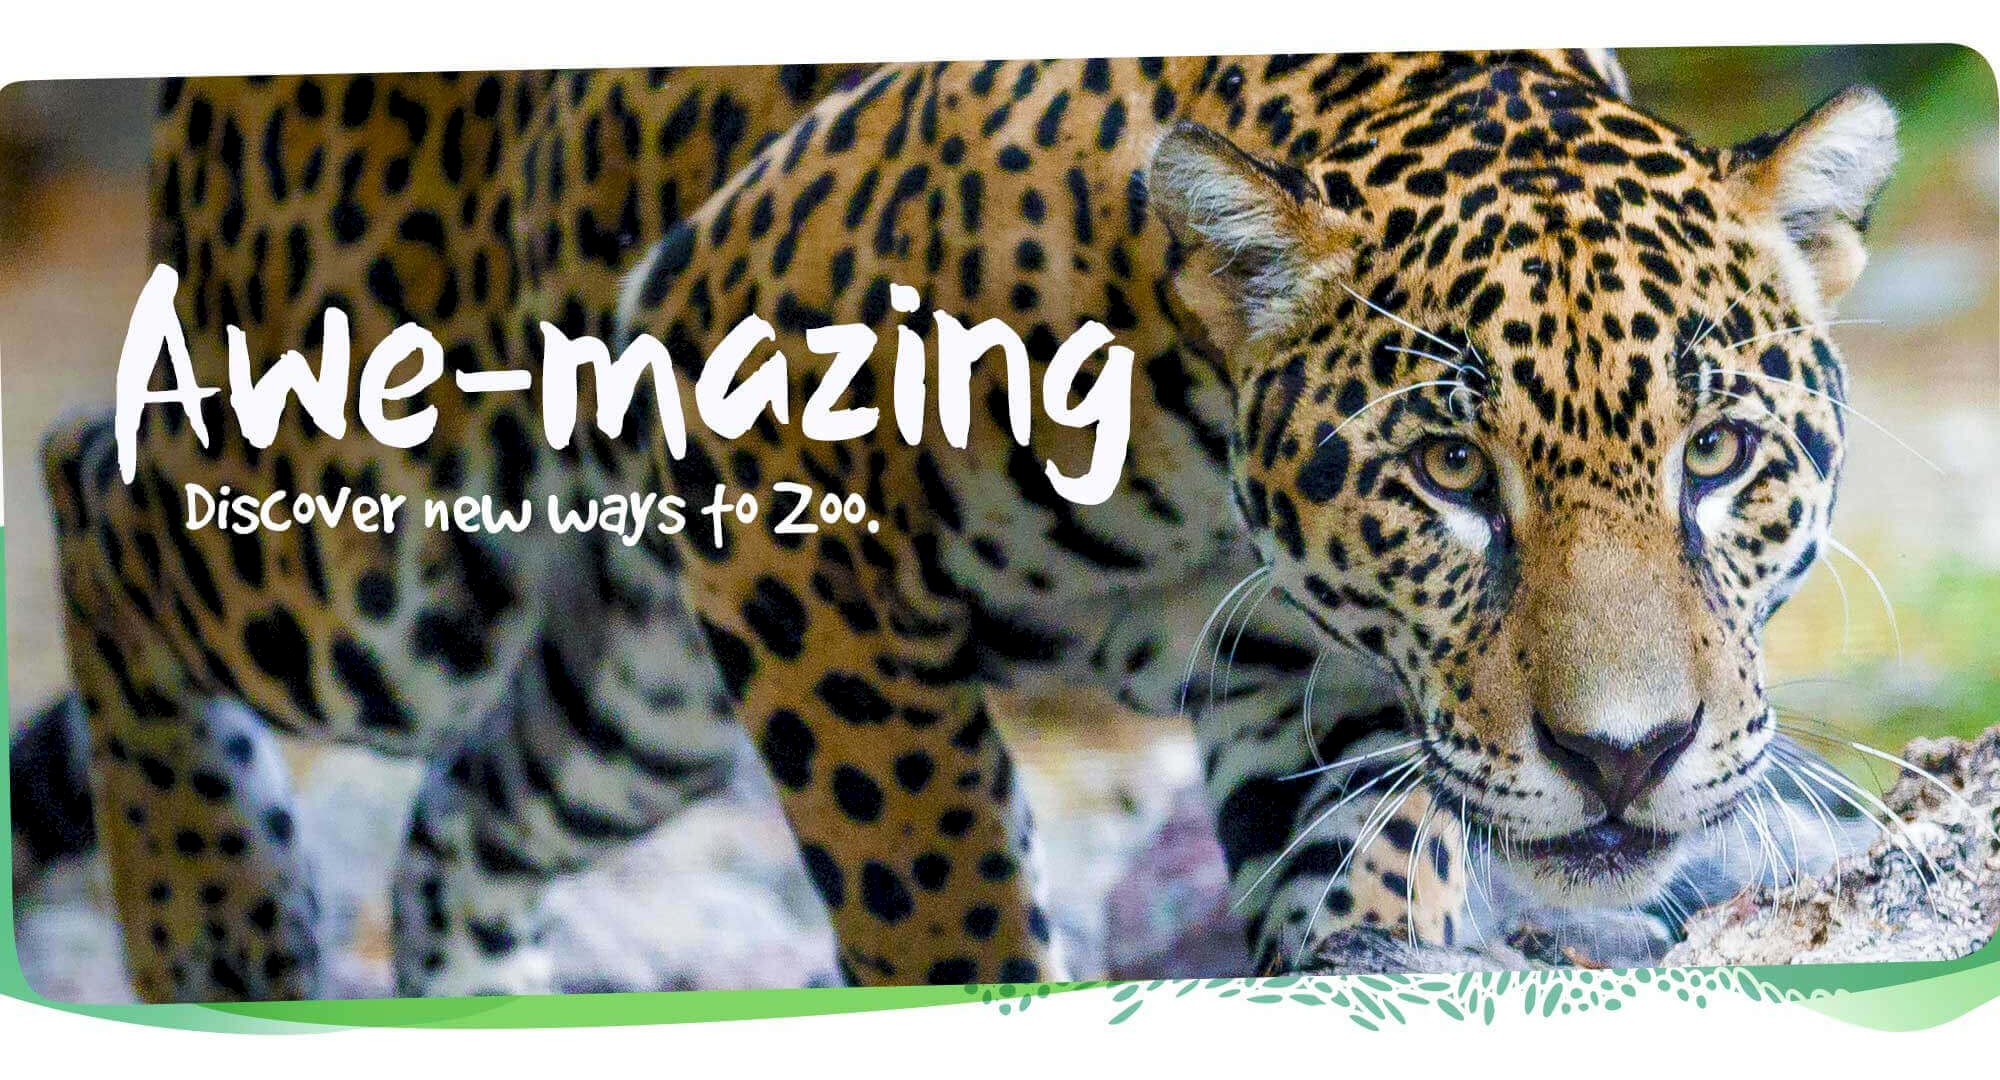 Discover awe-mazing new ways to zoo at The Living Desert Zoo and Gardens. Click for more information.